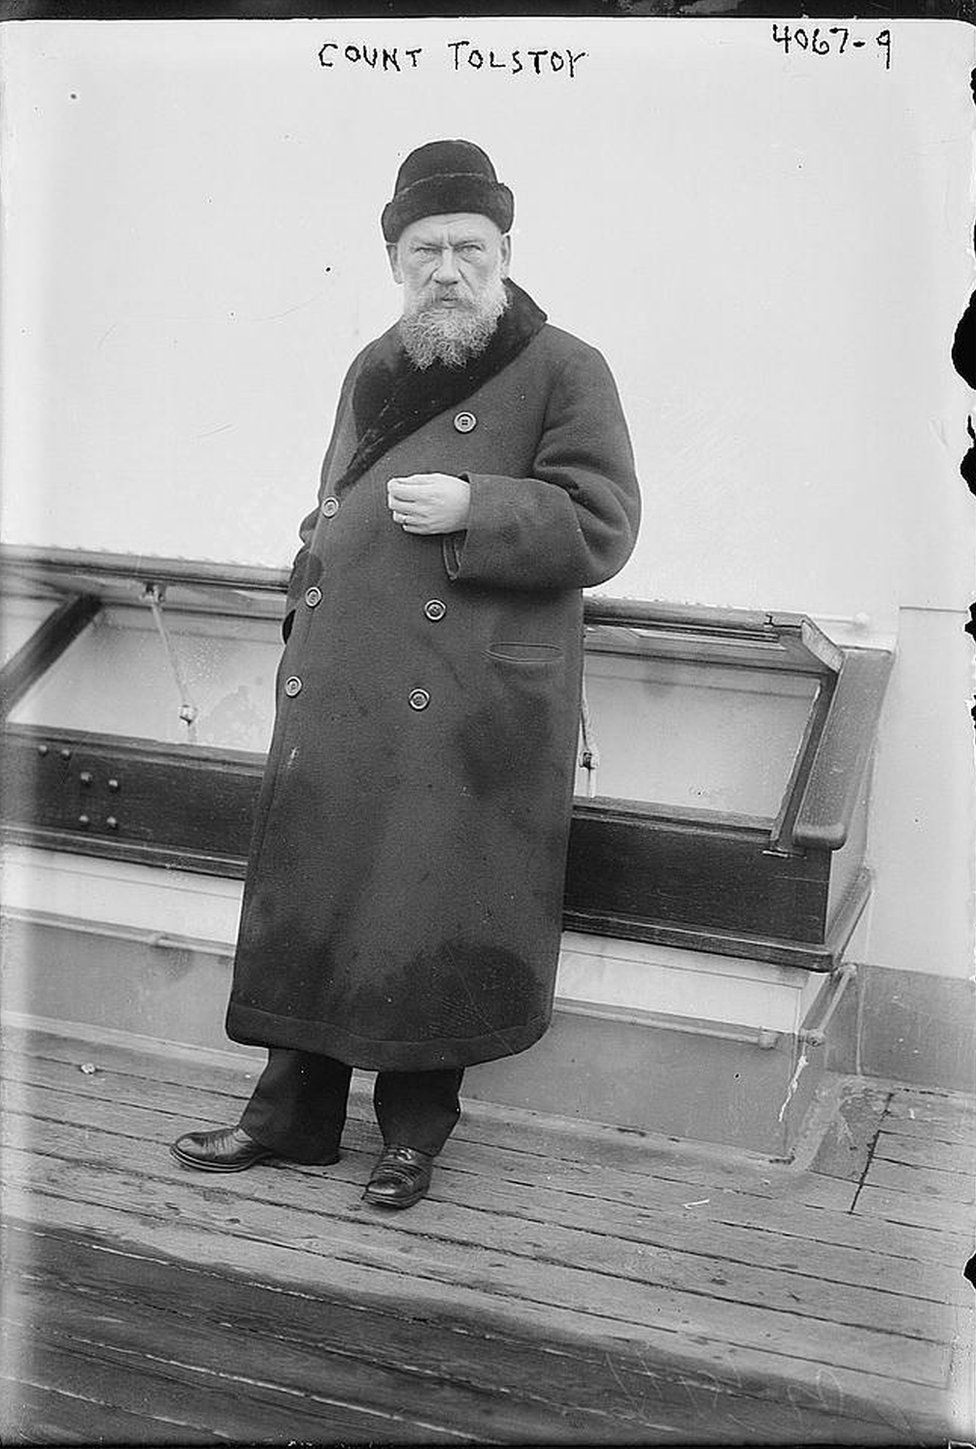 Count Tolstoy stands on board the deck